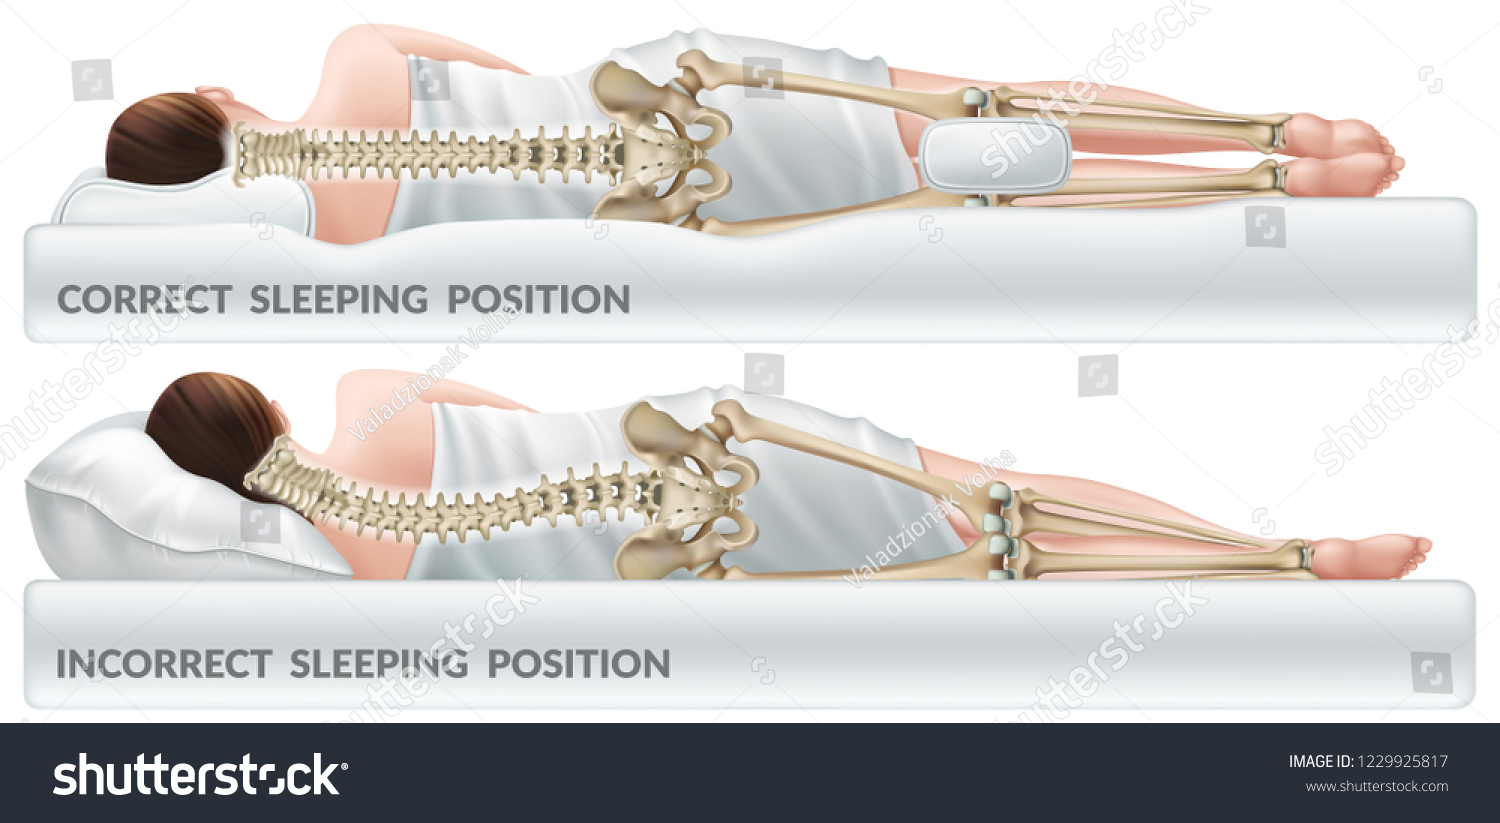 SVG of Orthopedic pillow for knees. Correct and incorrect sleeping position legs. Isolated 3d realistic vector illustration. svg